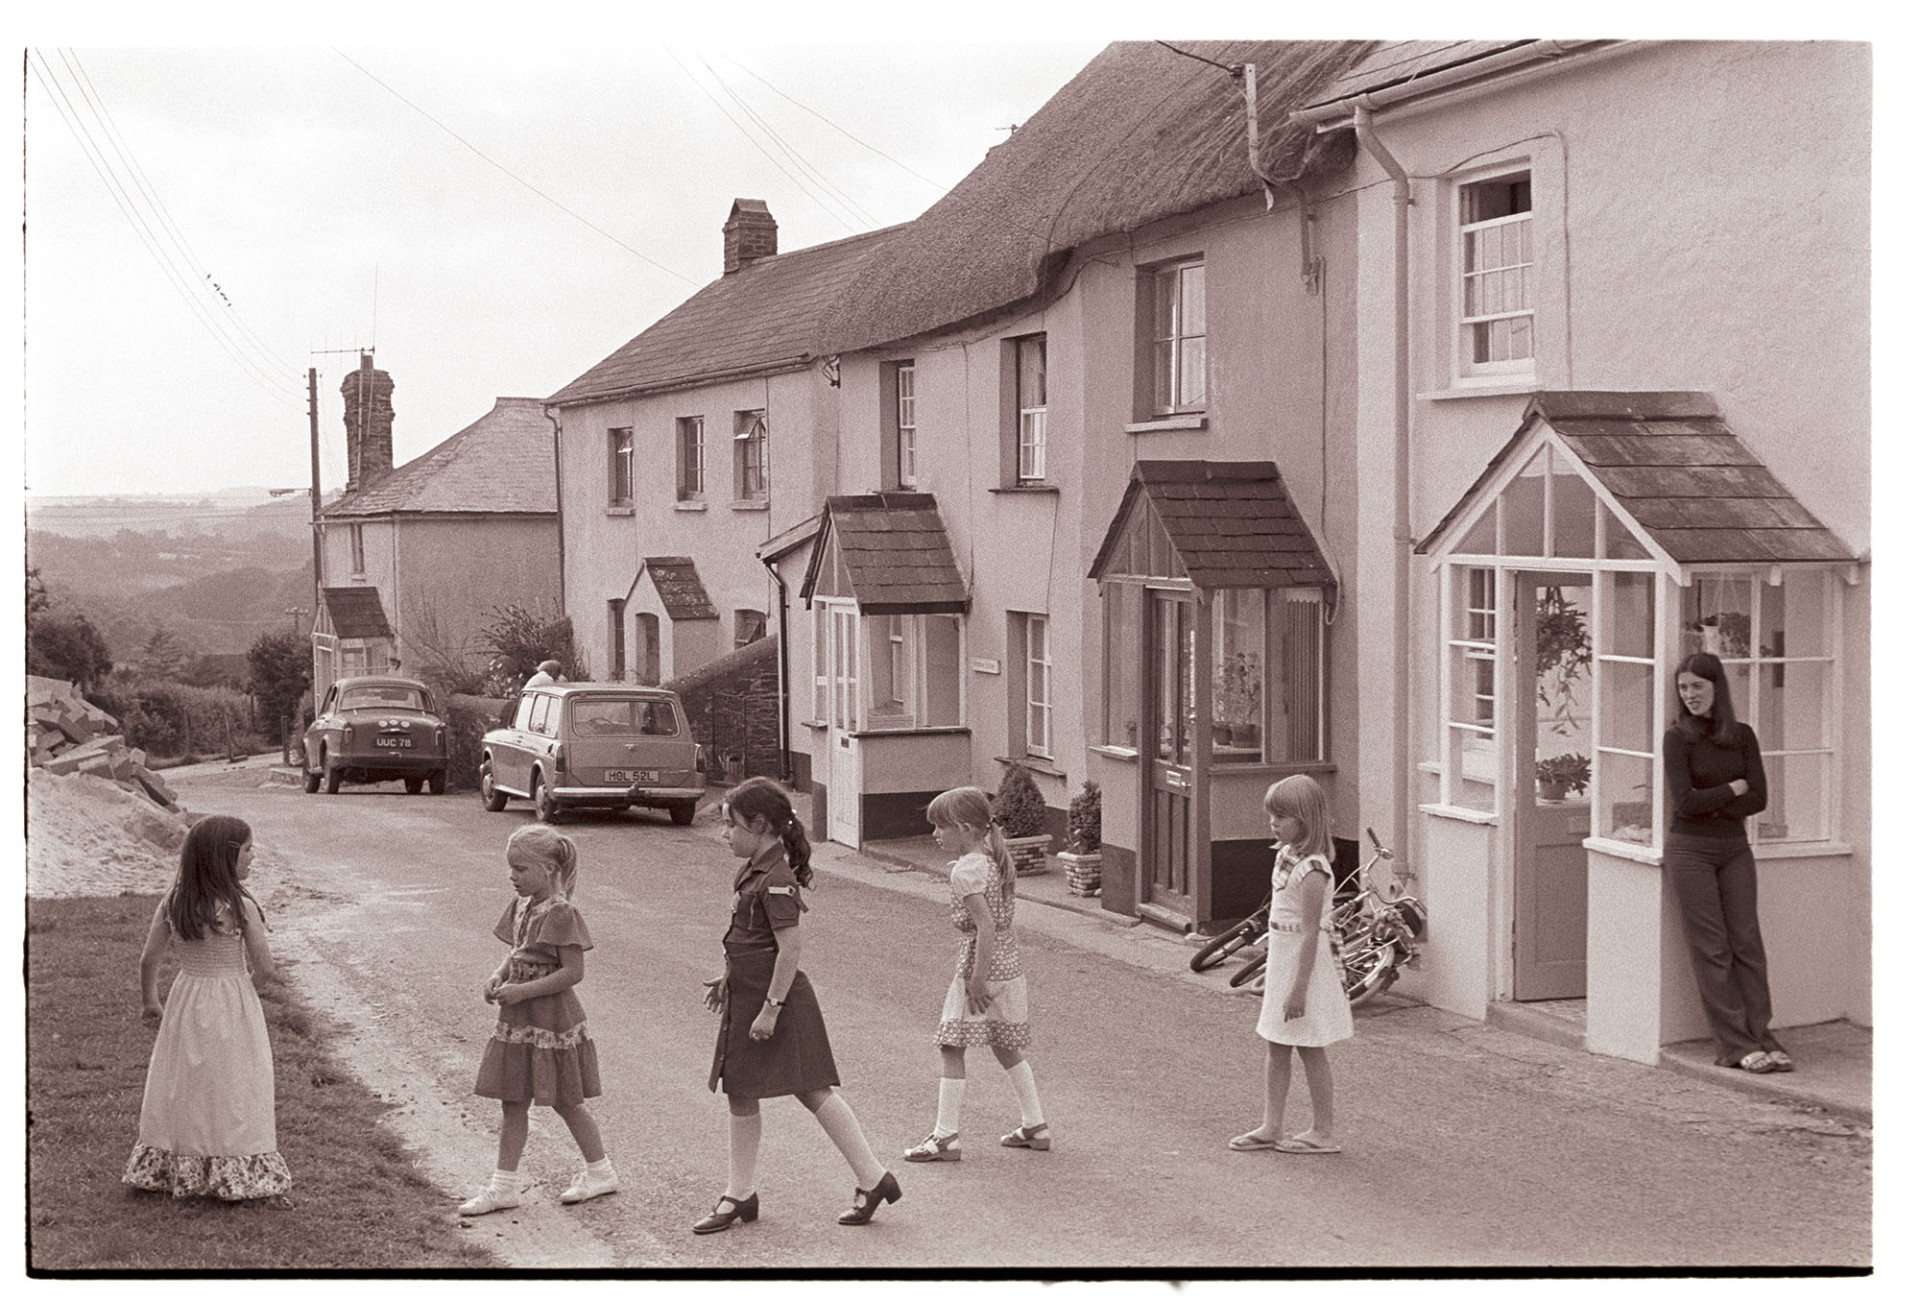 Children at birthday party playing Grandmothers Footsteps in street, party dresses. 
[A group of young girls in party dresses playing Grandmothers Footsteps in the street at West Lane, Dolton while Rosalind Squire, mother of one of the girls, looks on from the front of a house. There are more houses and parked cars down the lane in the background.]